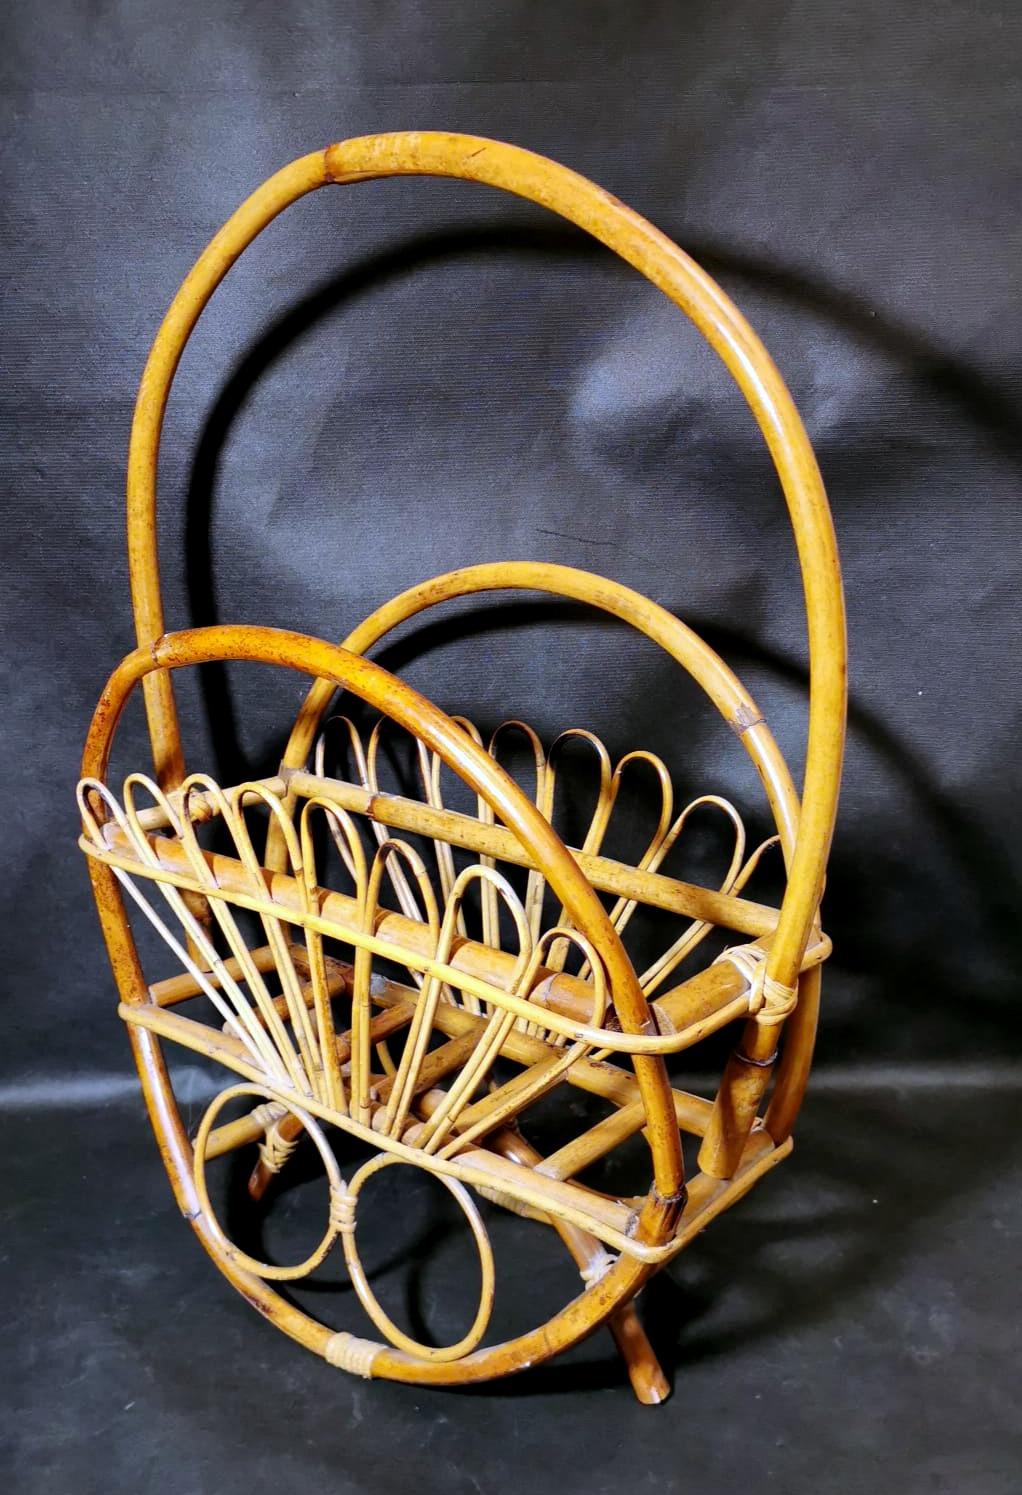 We kindly suggest you read the whole description, because with it we try to give you detailed technical and historical information to guarantee the authenticity of our objects.
Particular handcrafted magazine rack made of bamboo and rattan; it is